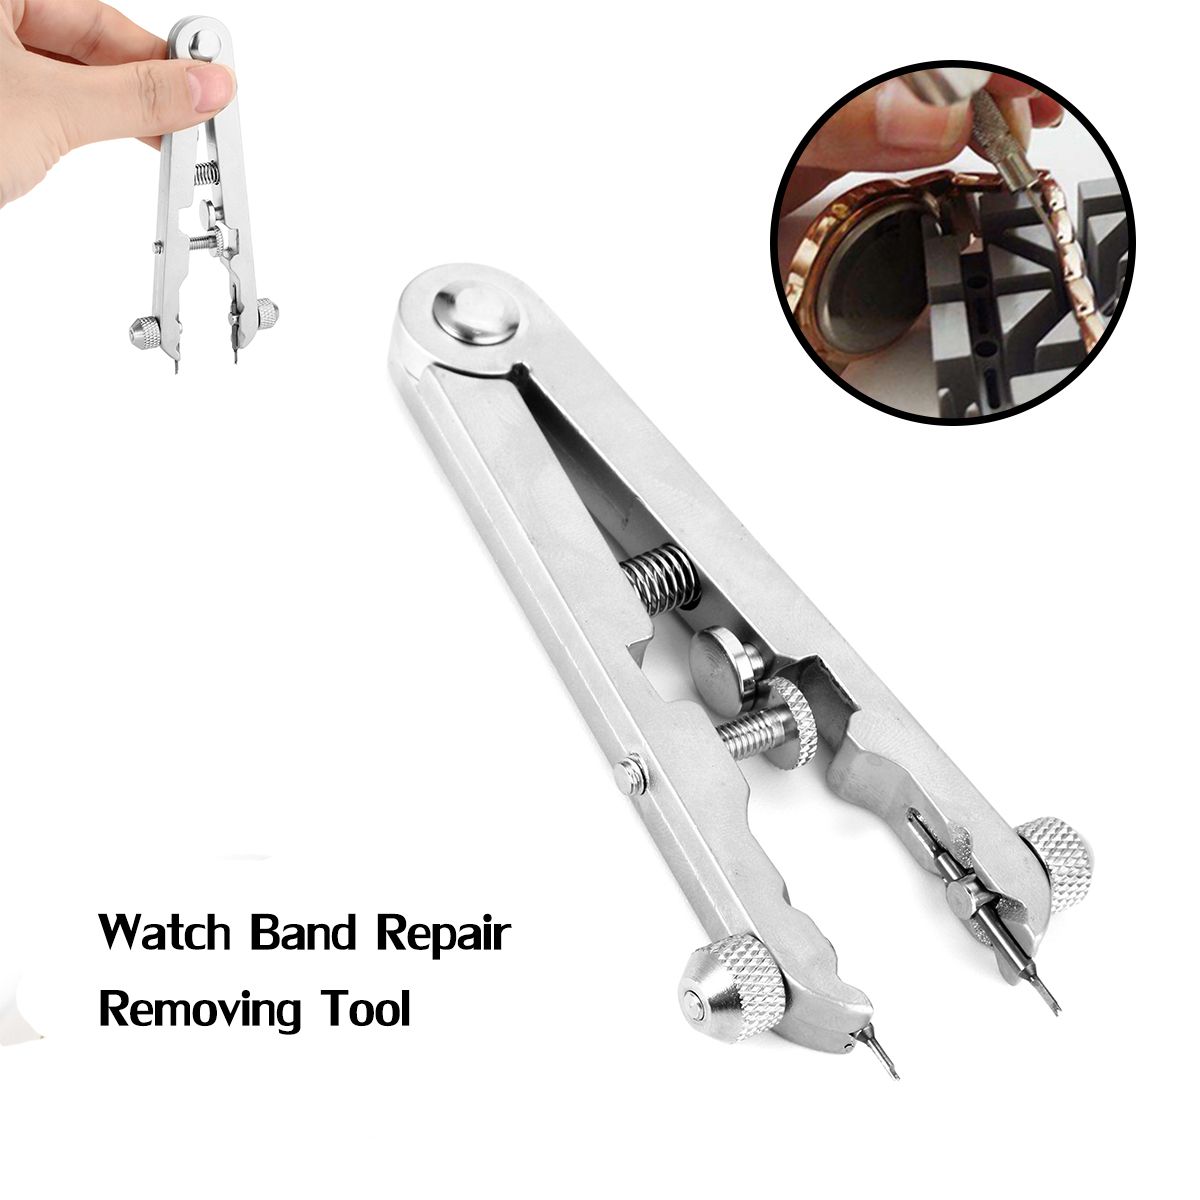 Watch-Bracelet-Spring-Bar-6825-Standard-Plier-Remover-Replace-Removing-Tool-1262786